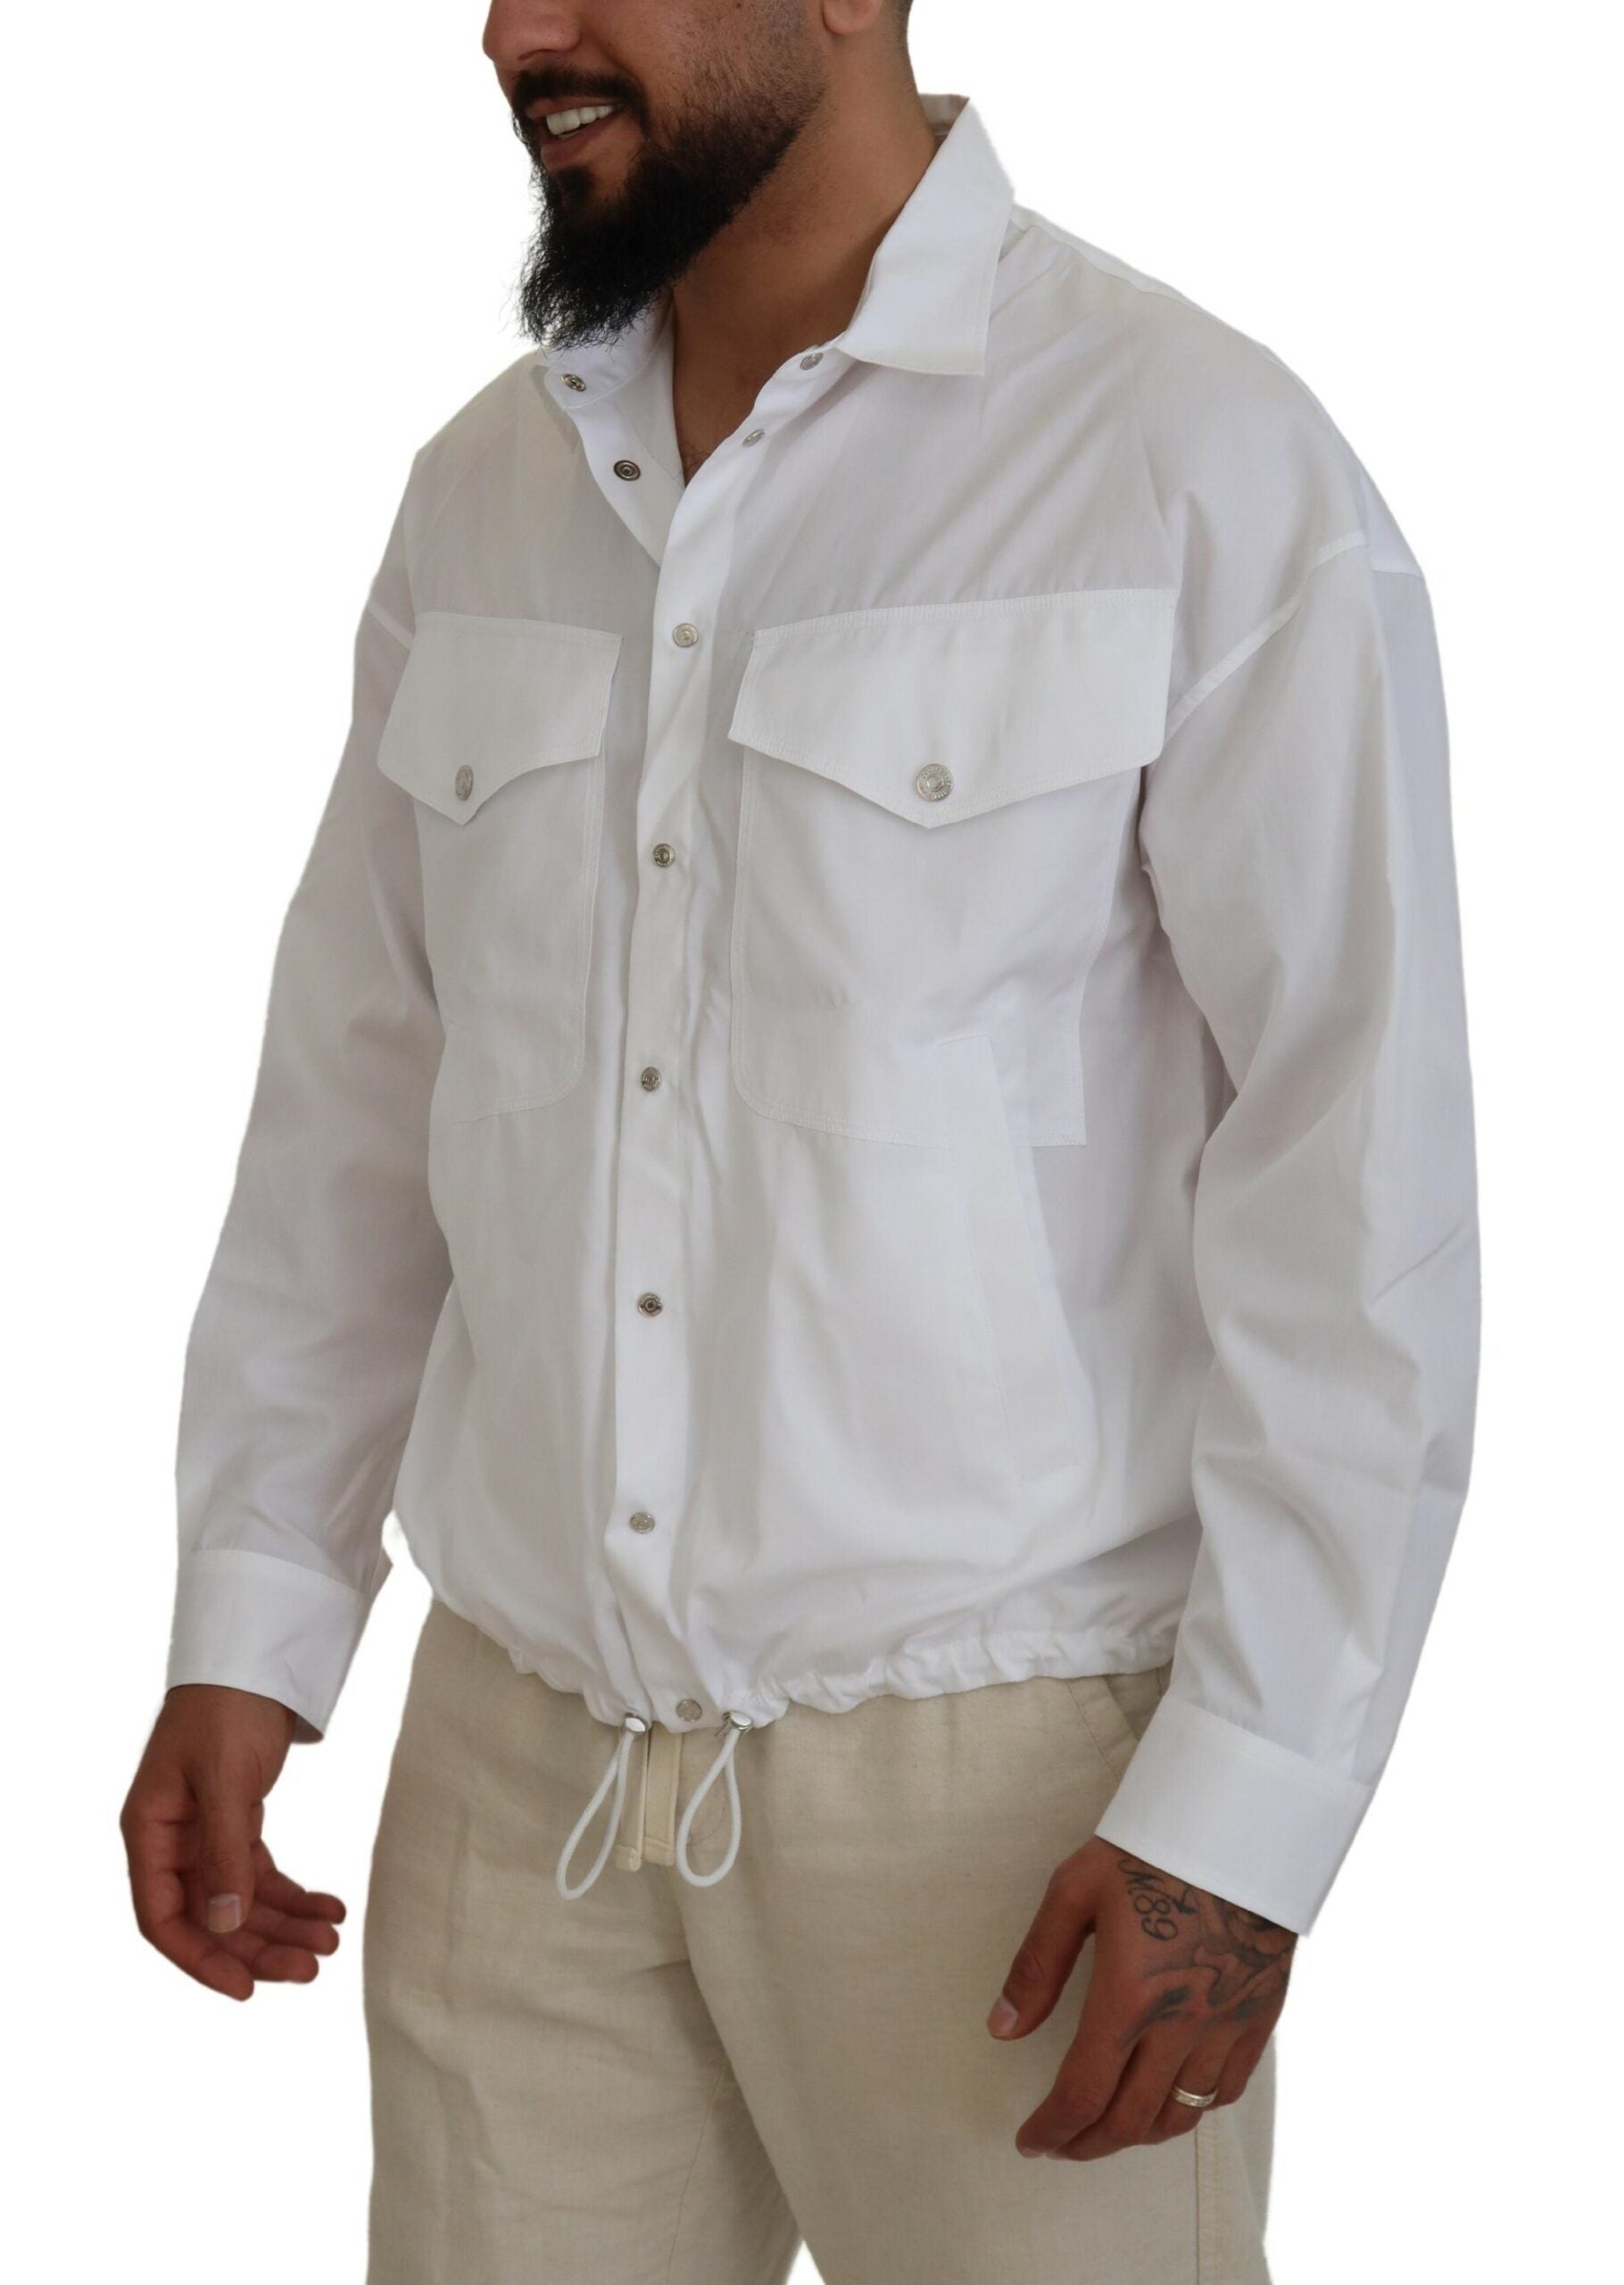 White Cotton Collared Casual Men Long Sleeves Jacket